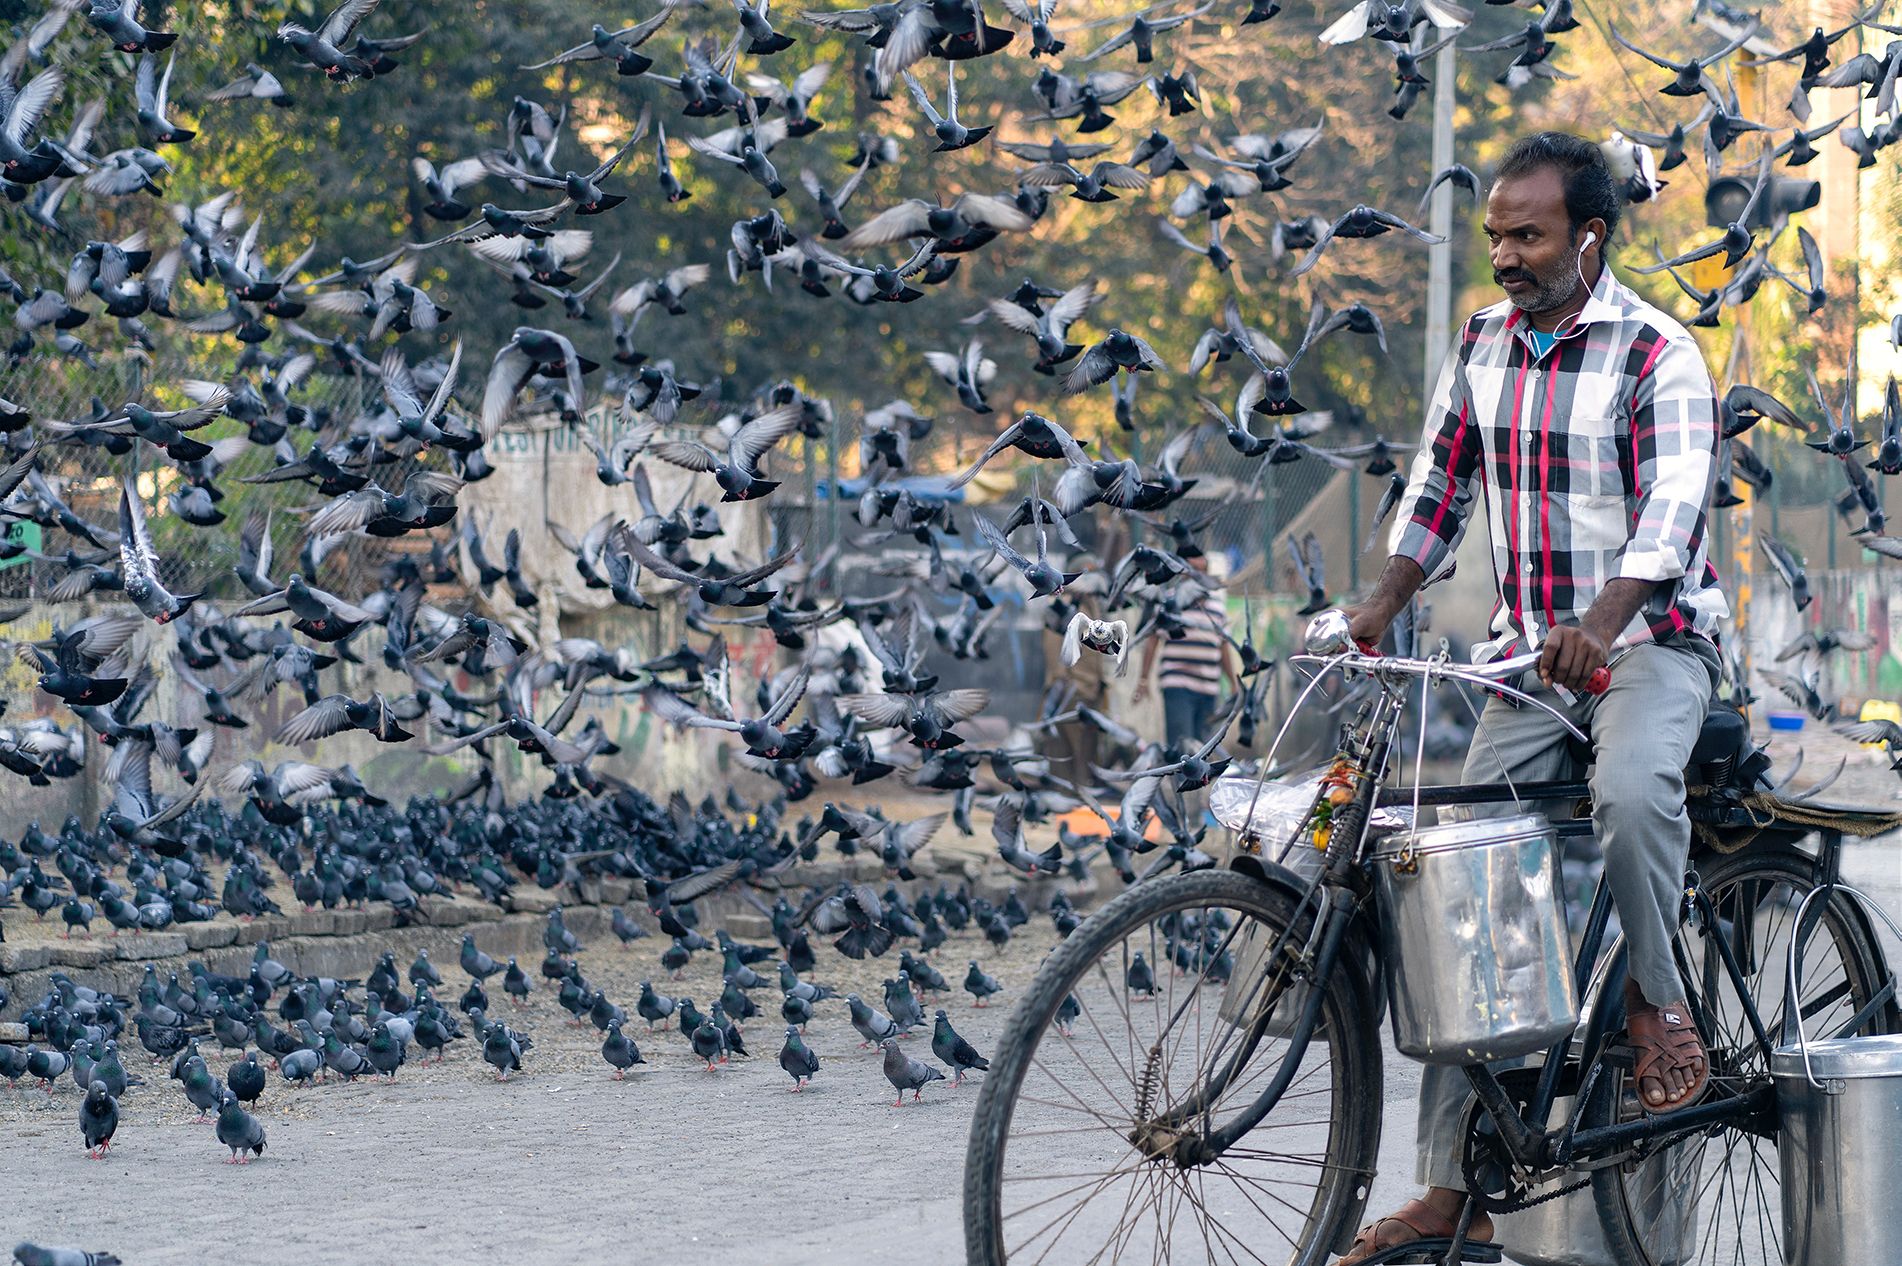 Bicyclist riding next to flock of pigeons